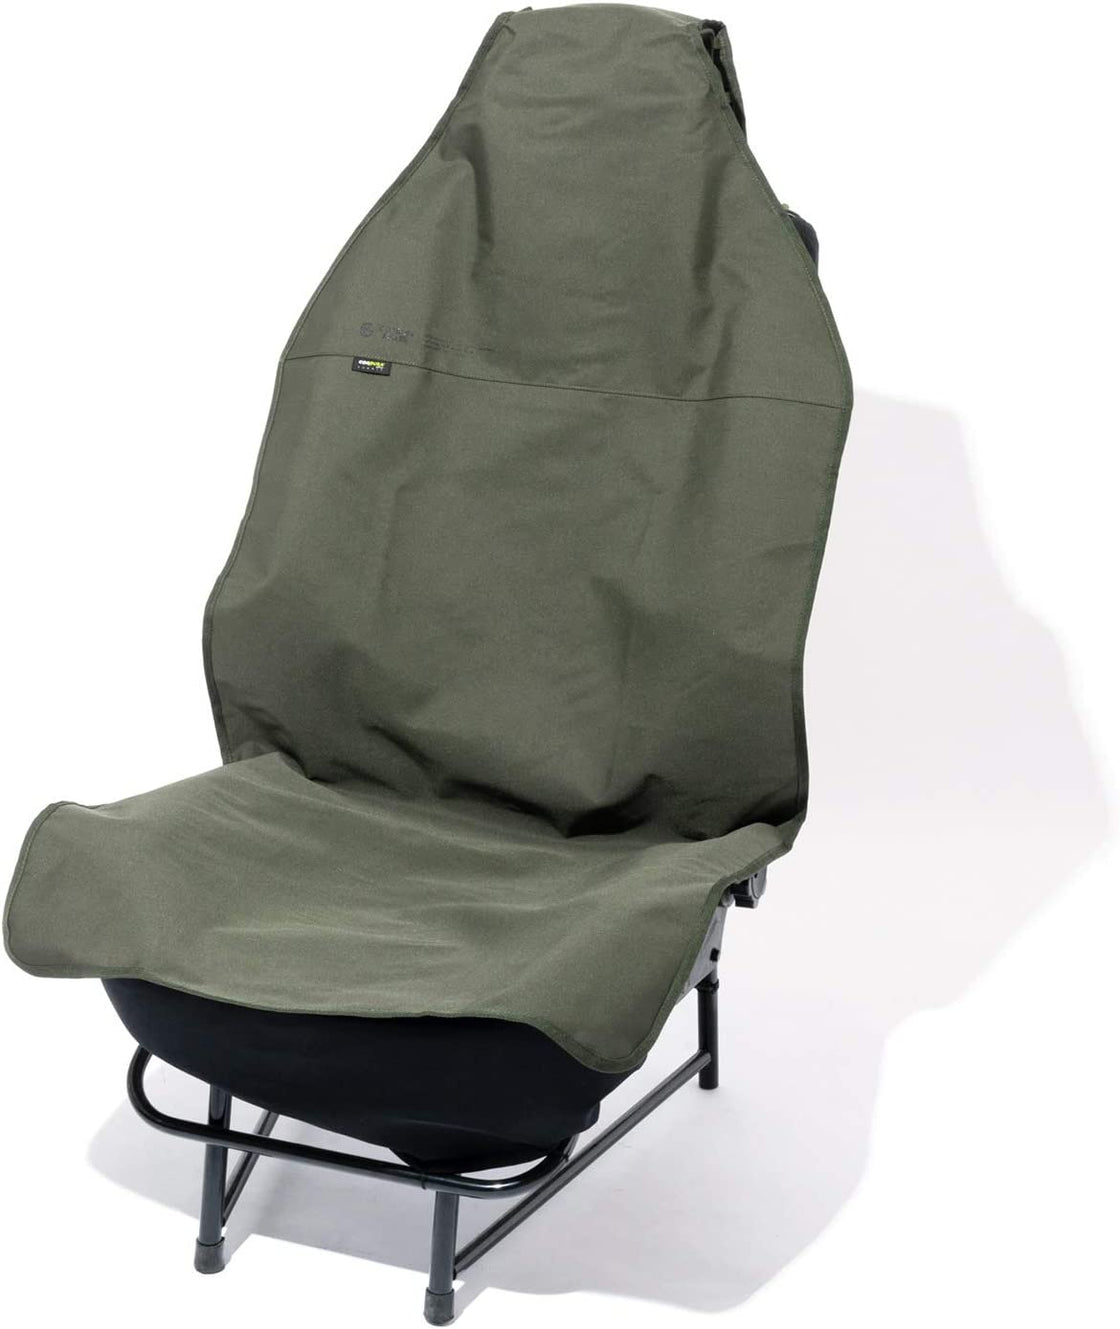 GORDON MILLER CORDURA FRONT SEAT COVER for front seat Waterproof Outdoor Camping 1642440 - WAFUU JAPAN